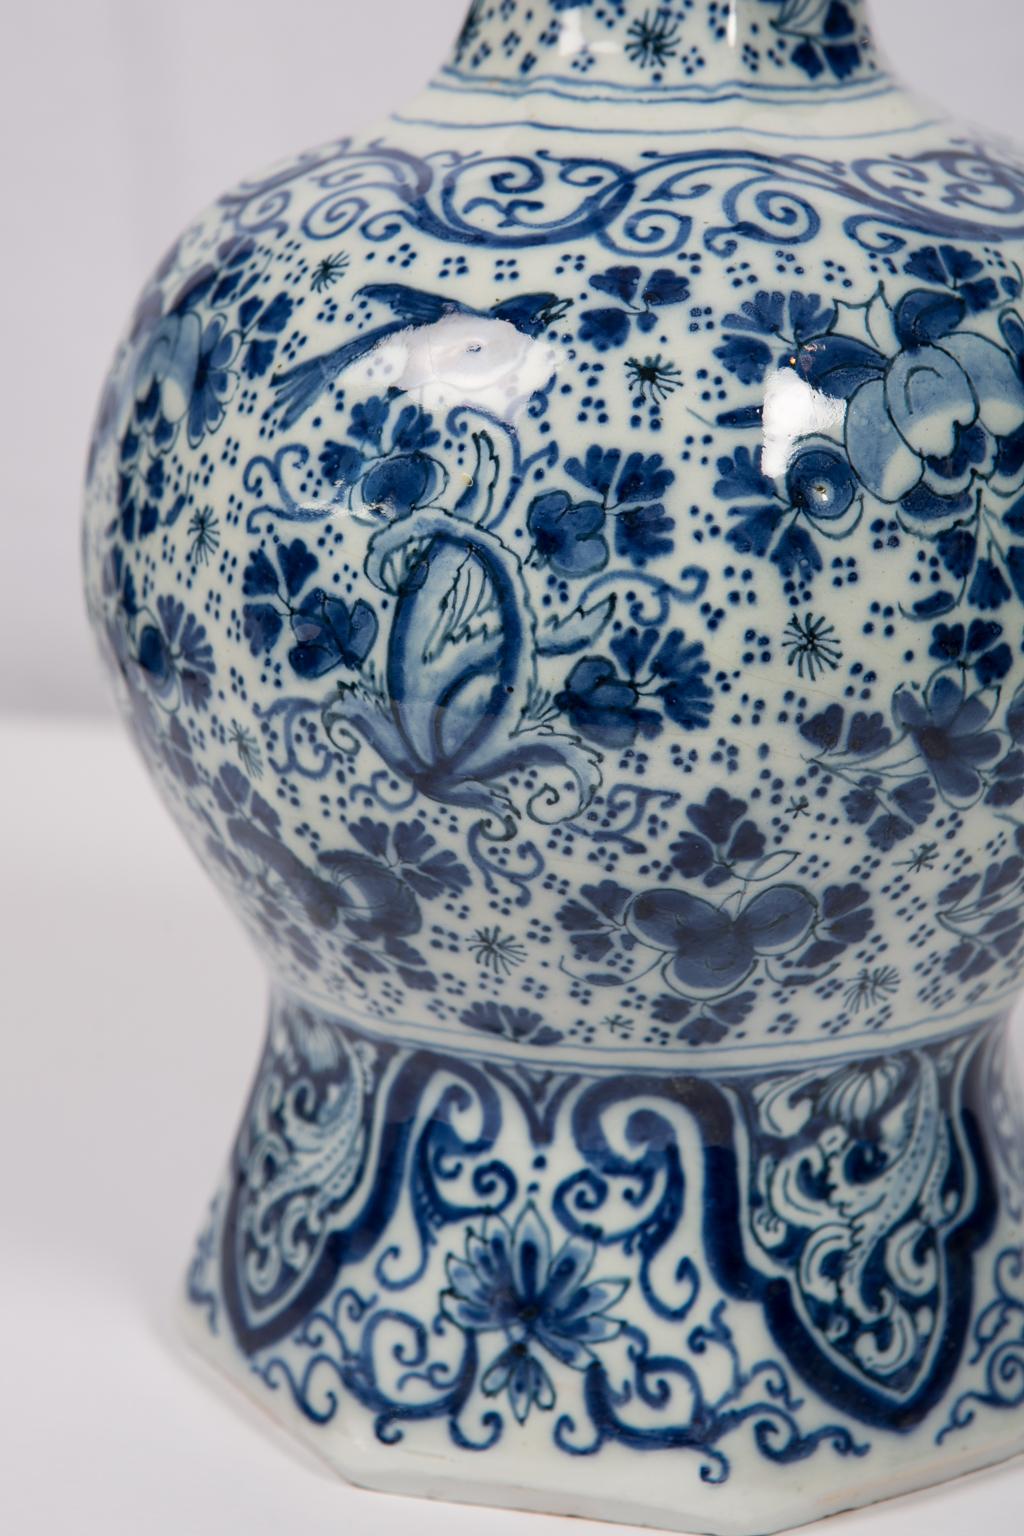 Chinoiserie Antique Delft Blue and White Vase Large Hand-Painted Made circa 1700